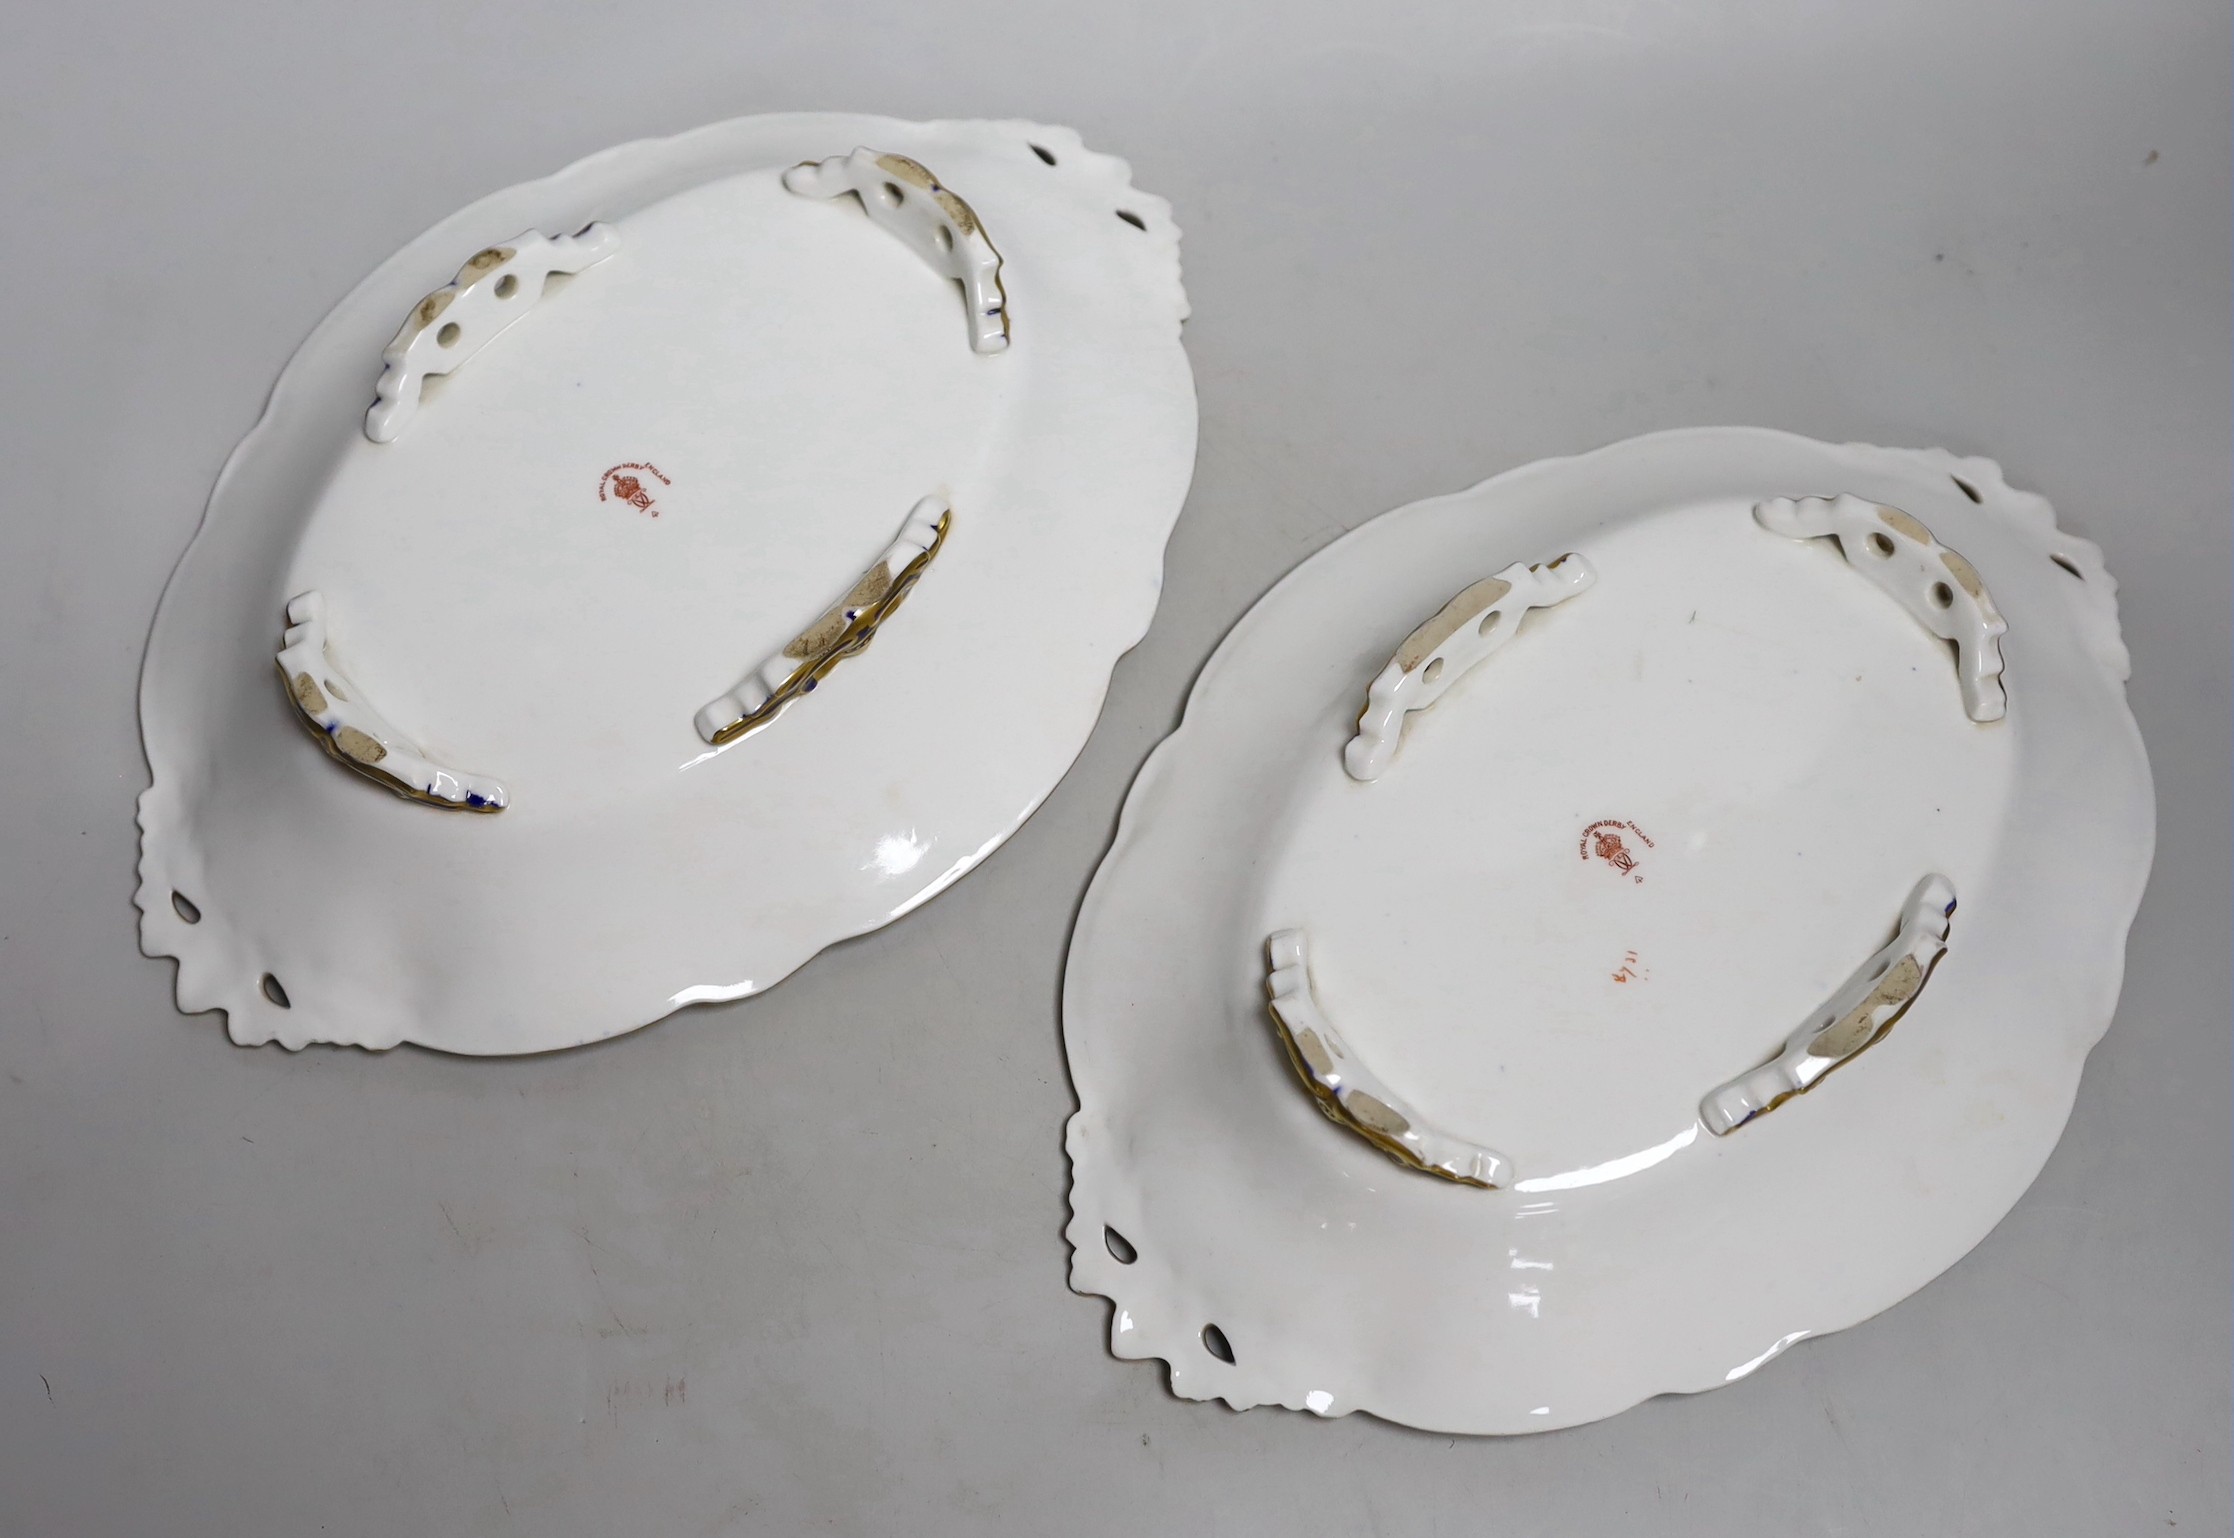 A pair of Royal Crown Derby Imari footed oval dishes, 29cms wide